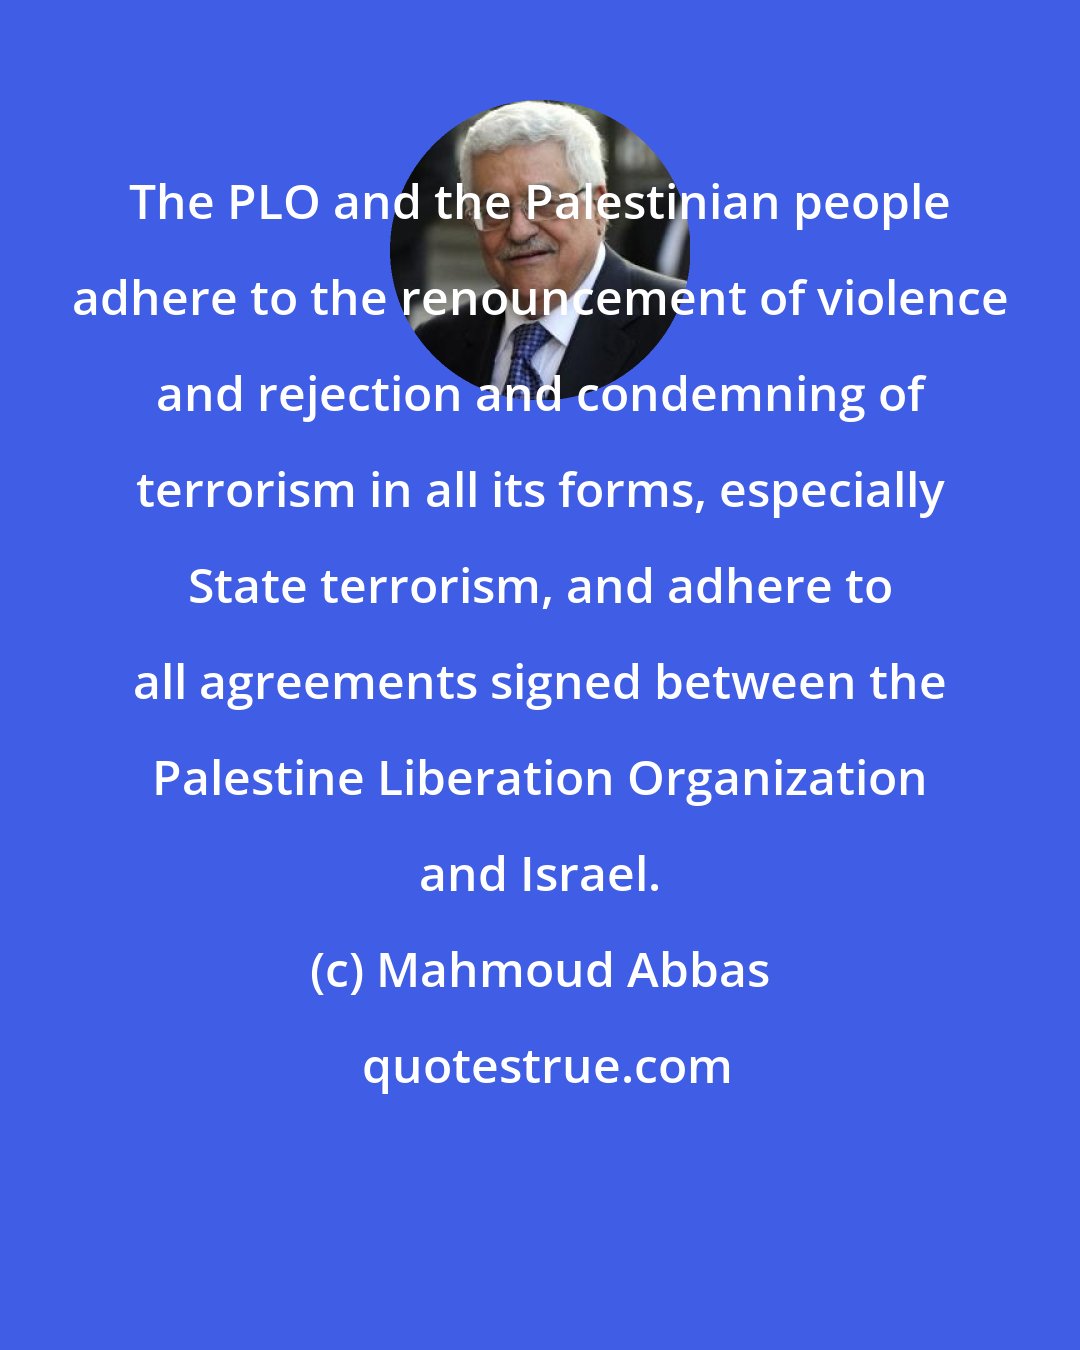 Mahmoud Abbas: The PLO and the Palestinian people adhere to the renouncement of violence and rejection and condemning of terrorism in all its forms, especially State terrorism, and adhere to all agreements signed between the Palestine Liberation Organization and Israel.